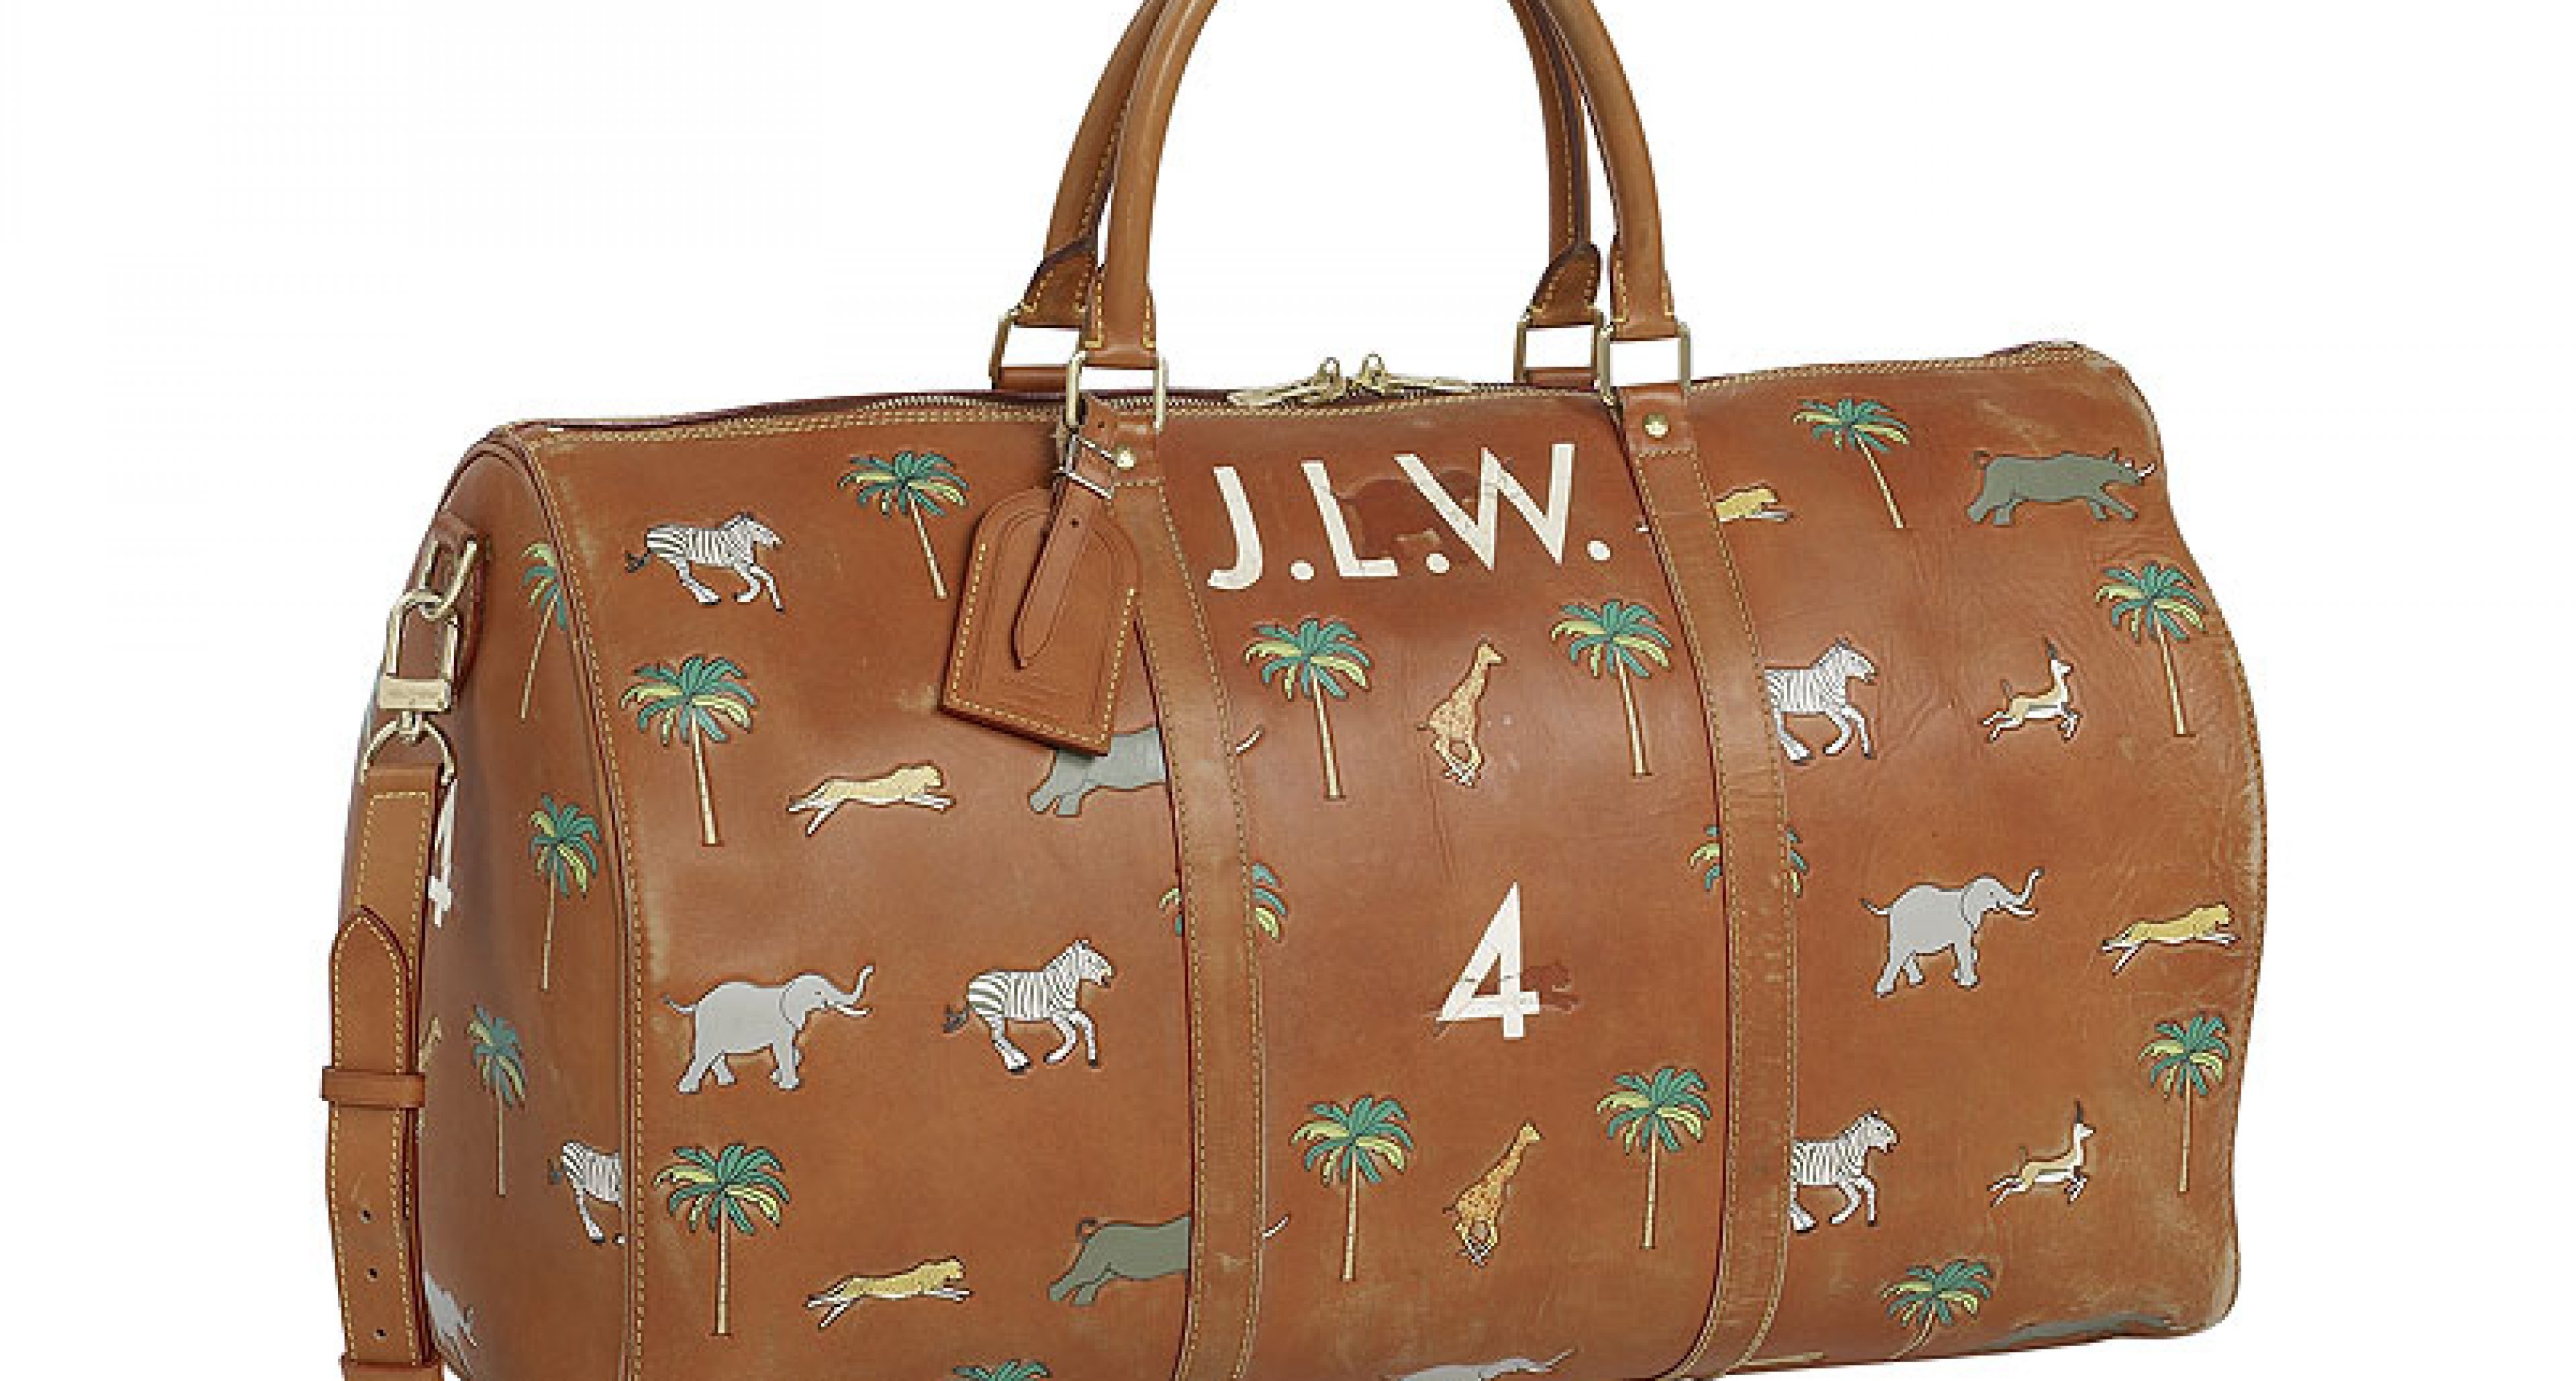 The Darjeeling Limited: Luggage by Louis Vuitton | Classic Driver Magazine